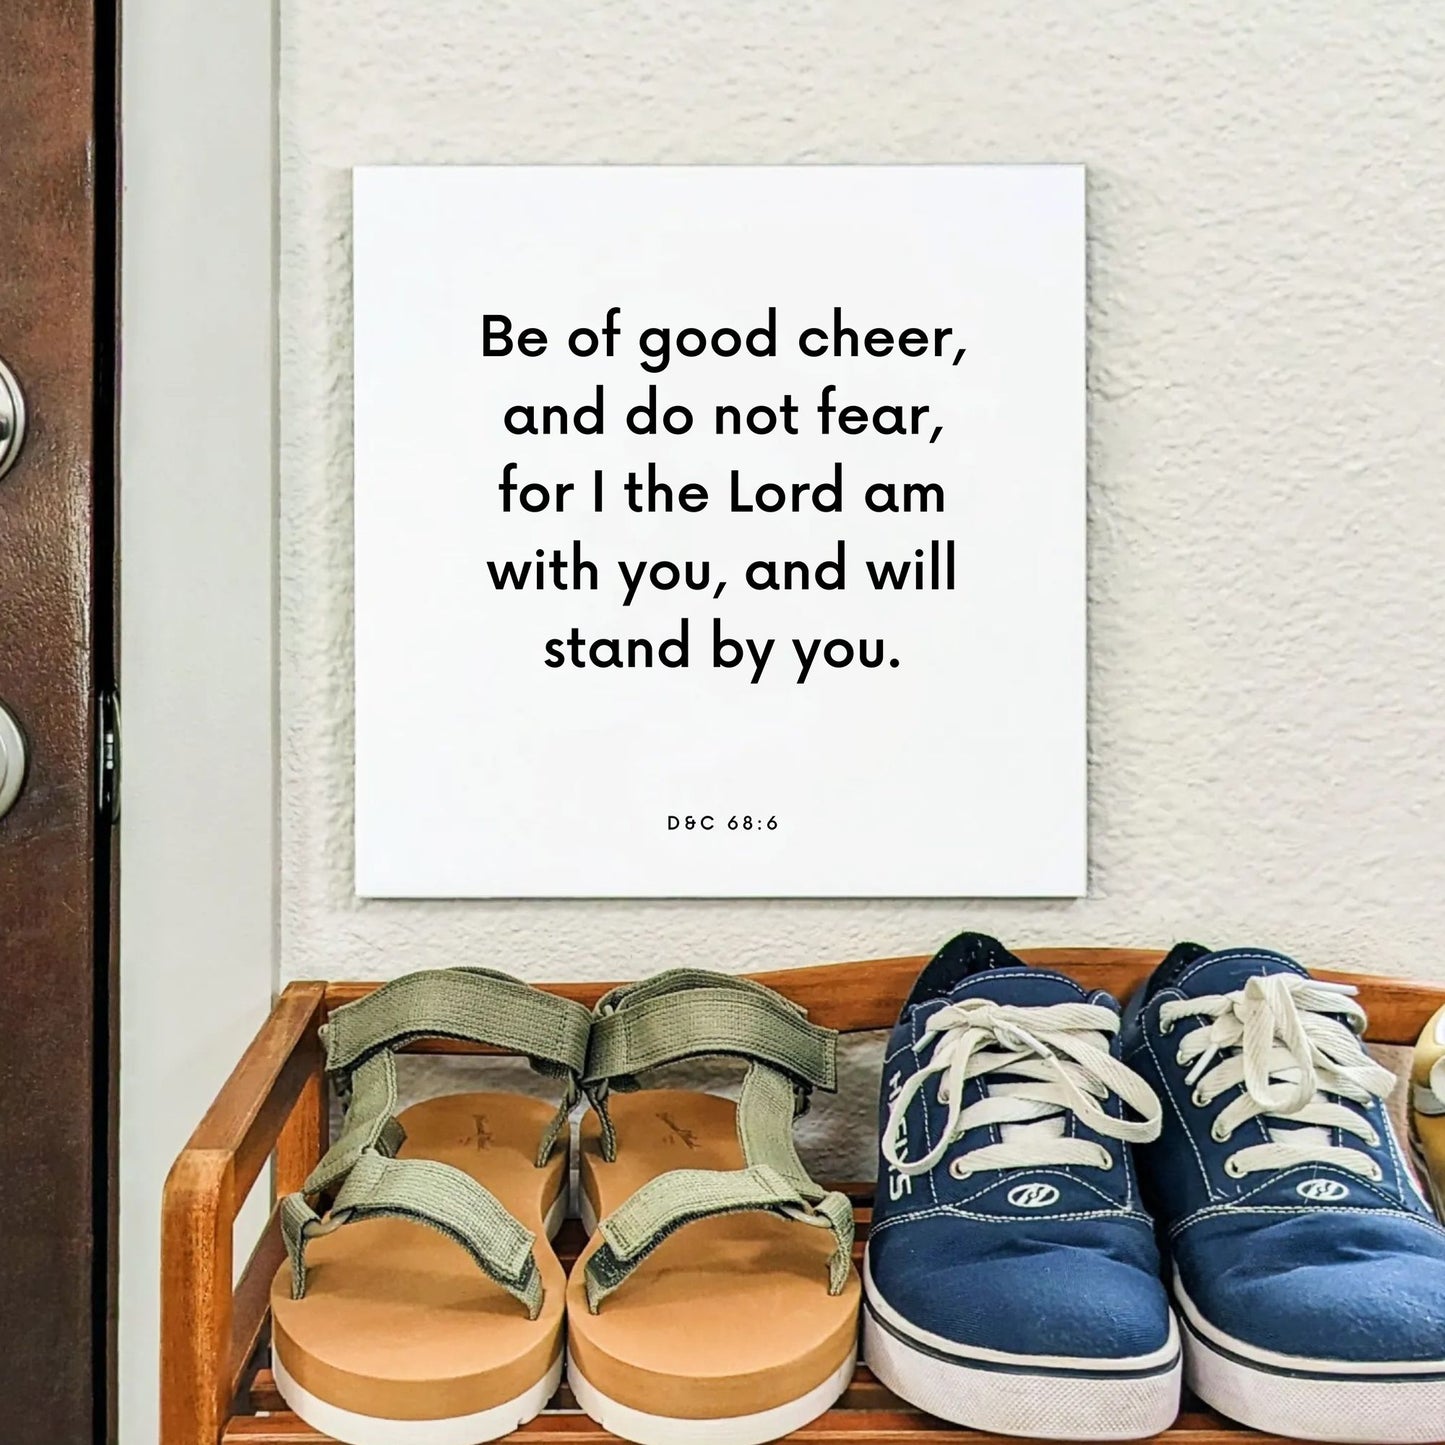 Shoes mouting of the scripture tile for D&C 68:6 - "Be of good cheer, and do not fear"